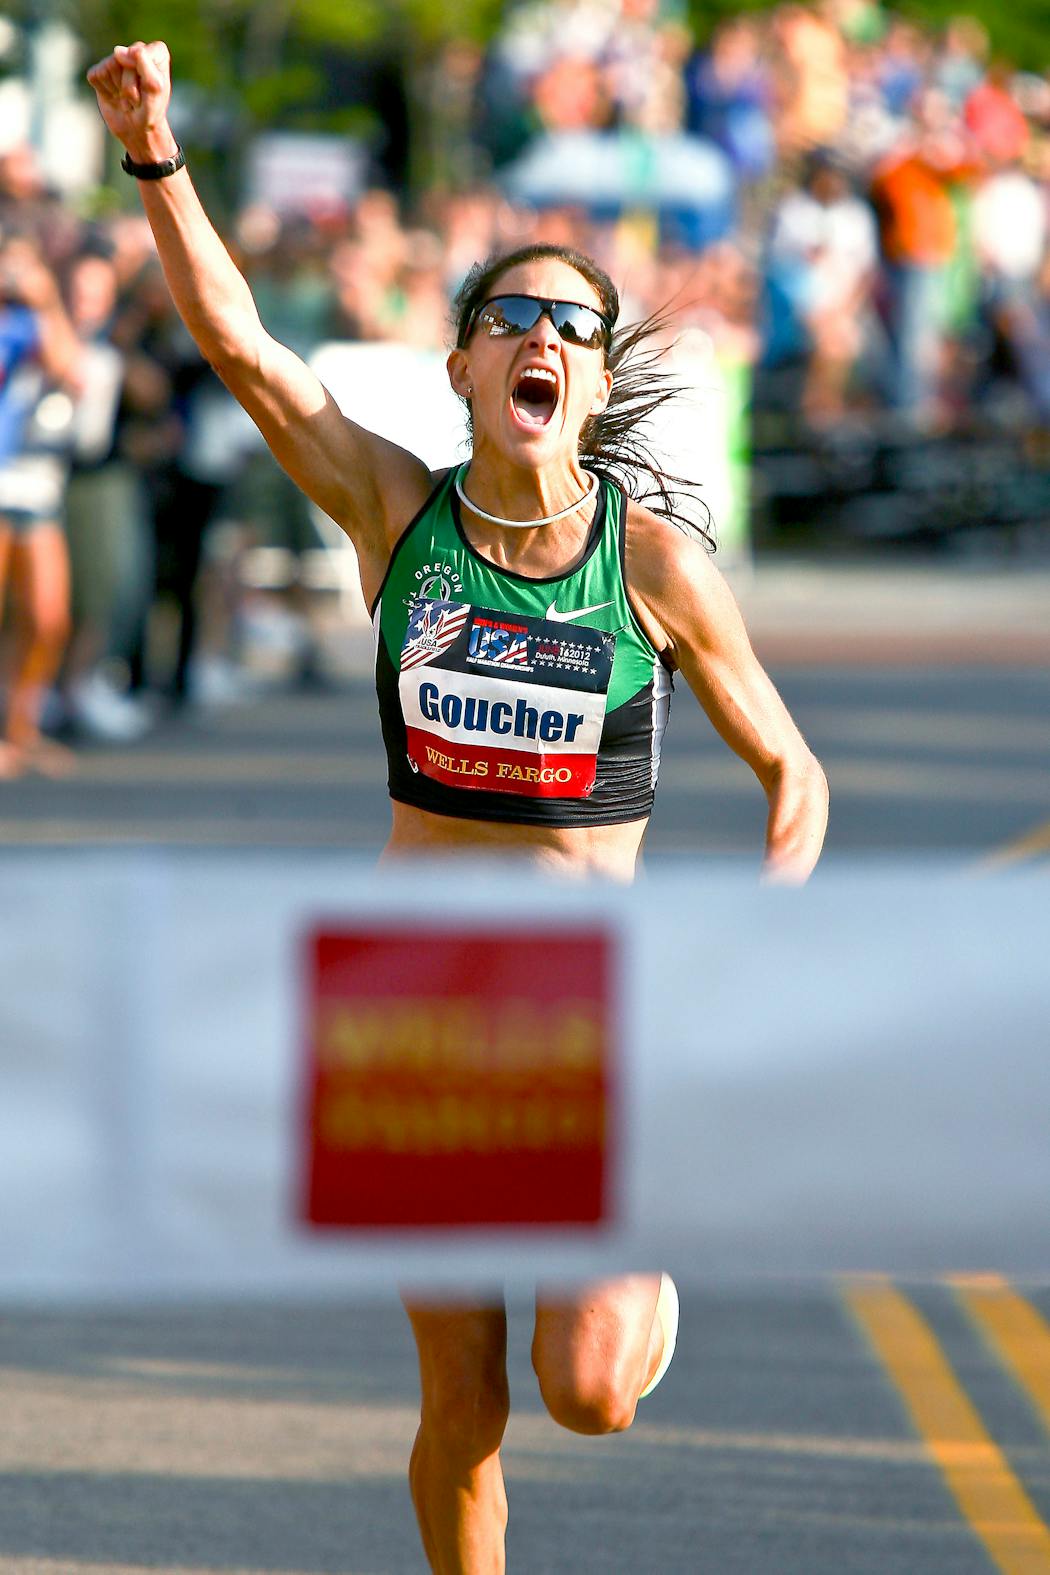 Kara Goucher raised her fist in celebration as she approached the finish line of the U.S. Half Marathon Championship on June 16, 2012, in Canal Park in Duluth.